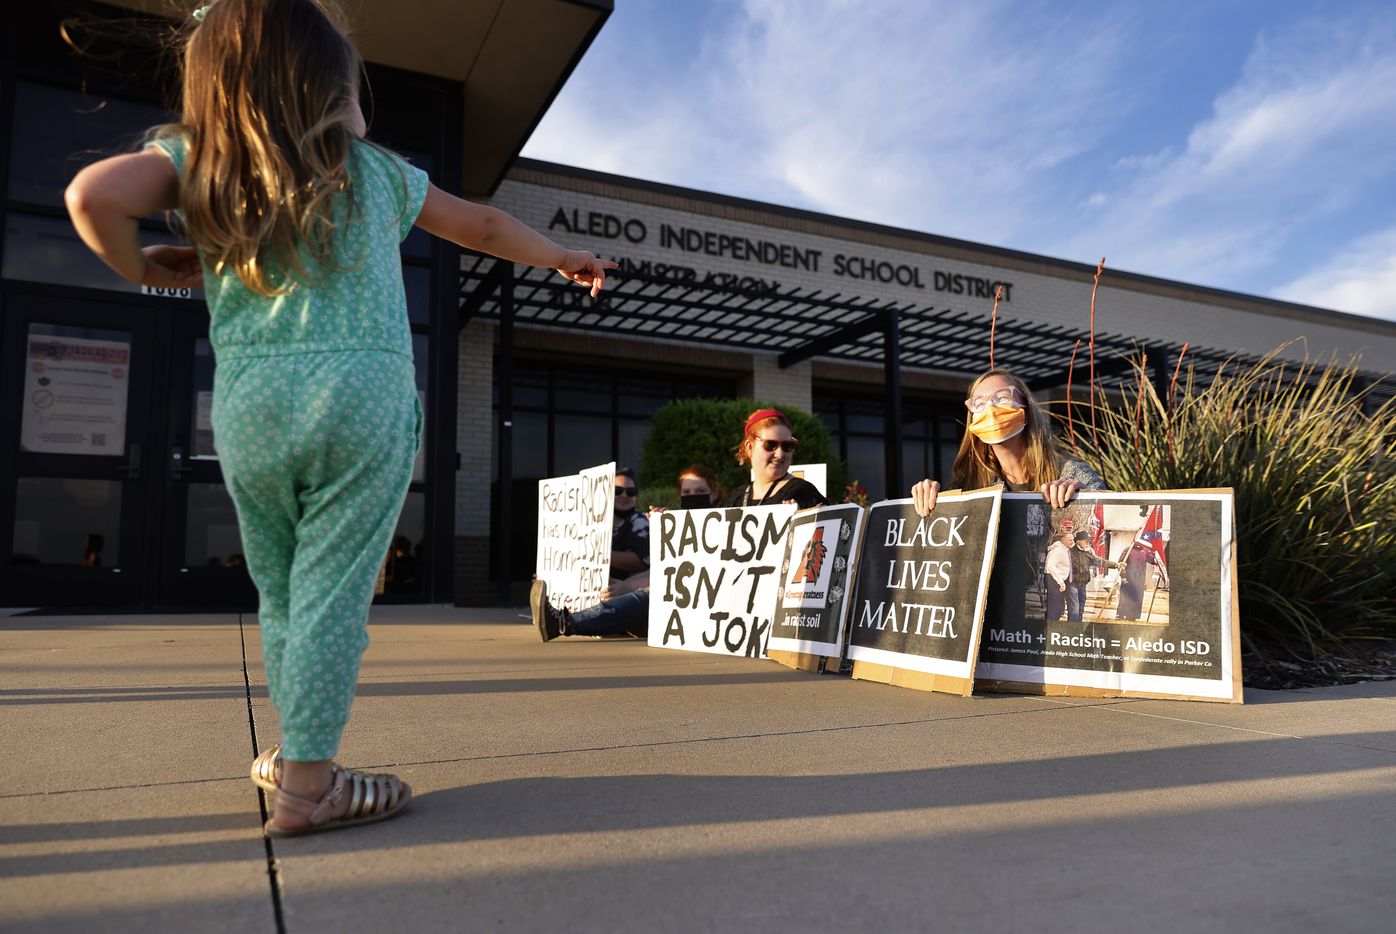 Protestors Kayla Miles of Dallas (right) and Emily Overton of Weatherford display signs outside an Aledo ISD school board meeting, Monday, April 19, 2021. Parents and supporters voiced their concerns about racism in the district following a student-led racist Snapchat group with multiple names, including “Slave Trade” and another that included a racial slur. (Tom Fox/The Dallas Morning News)